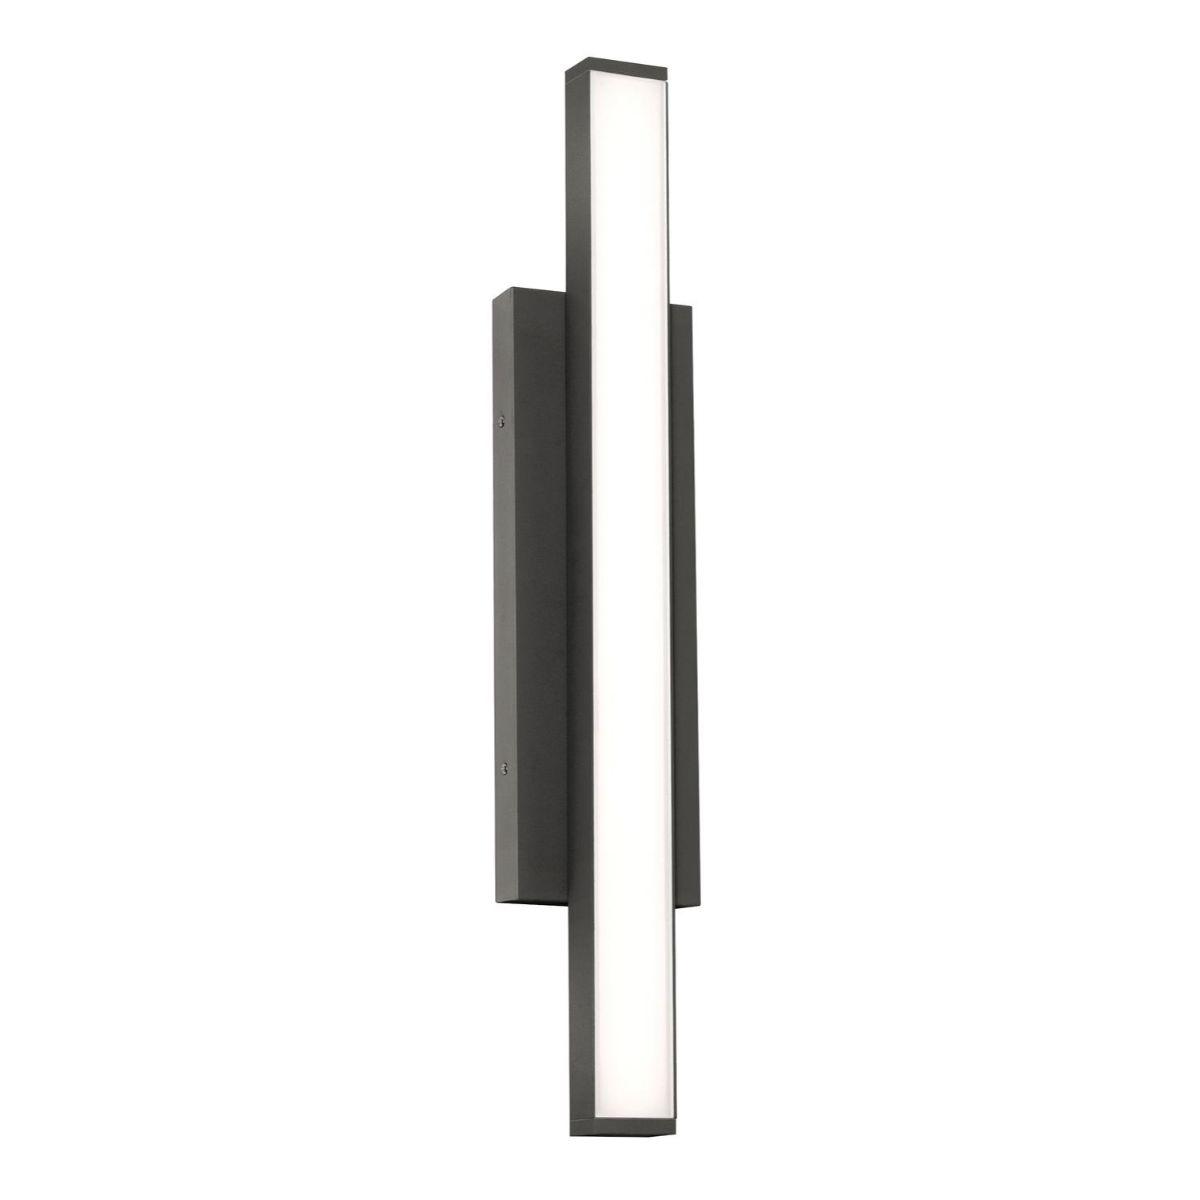 Gale 24 in. LED Outdoor Wall Sconce 1000 lumens 3000K